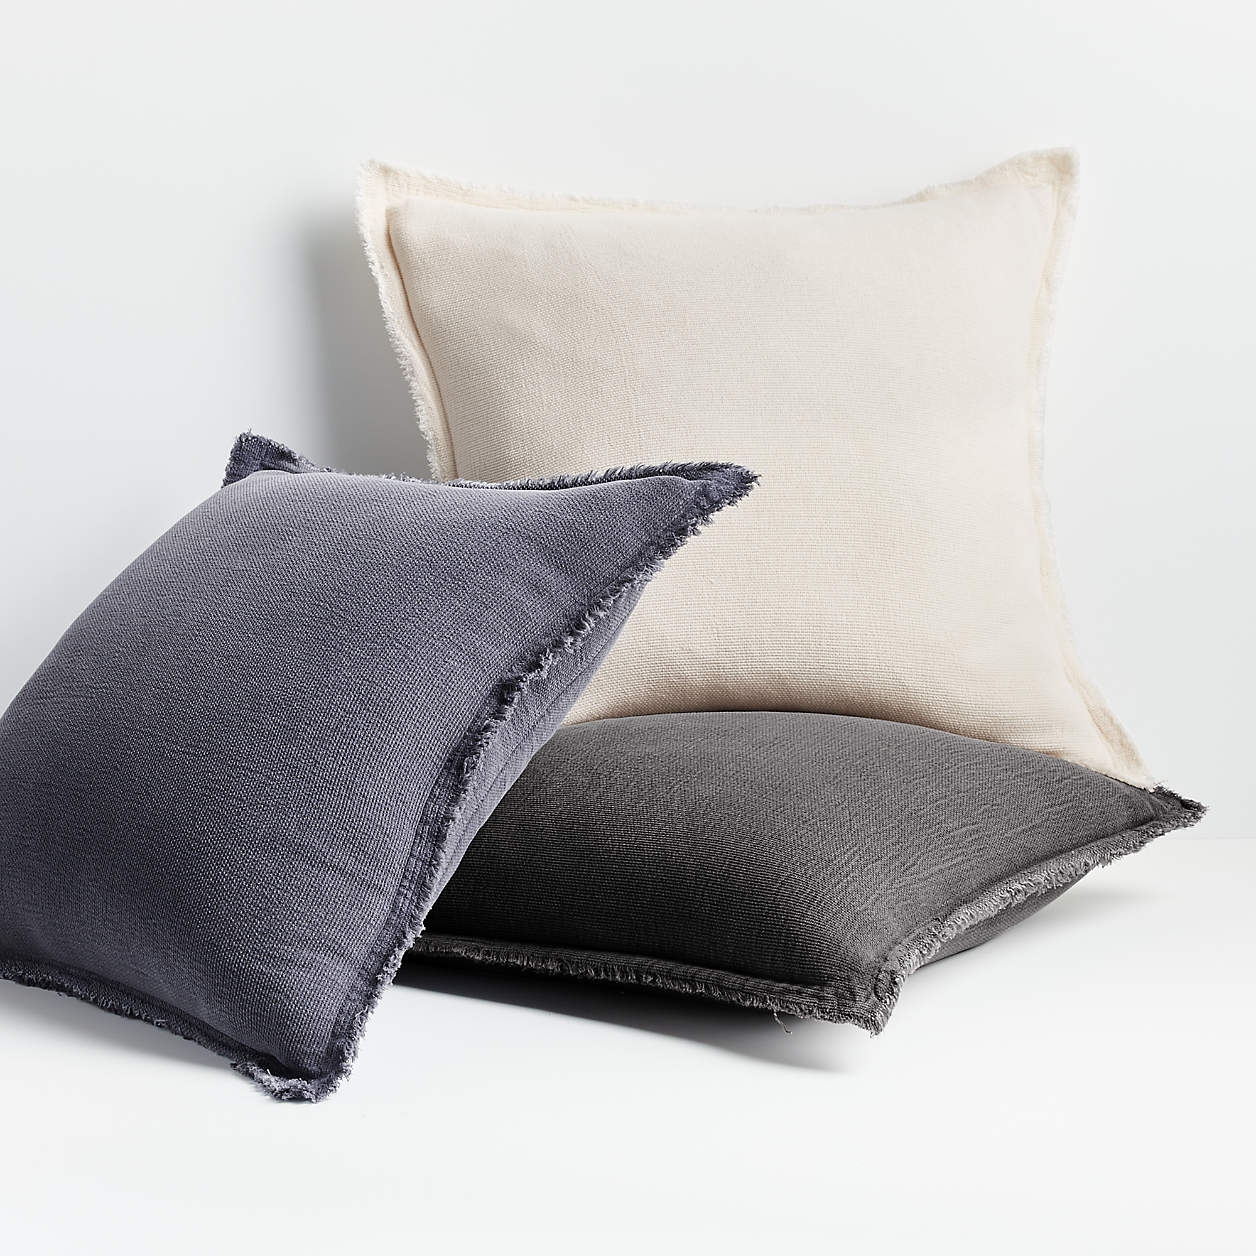 Olind Pillow with Feather-Down Insert, Gray, 23" x 23" - Image 1